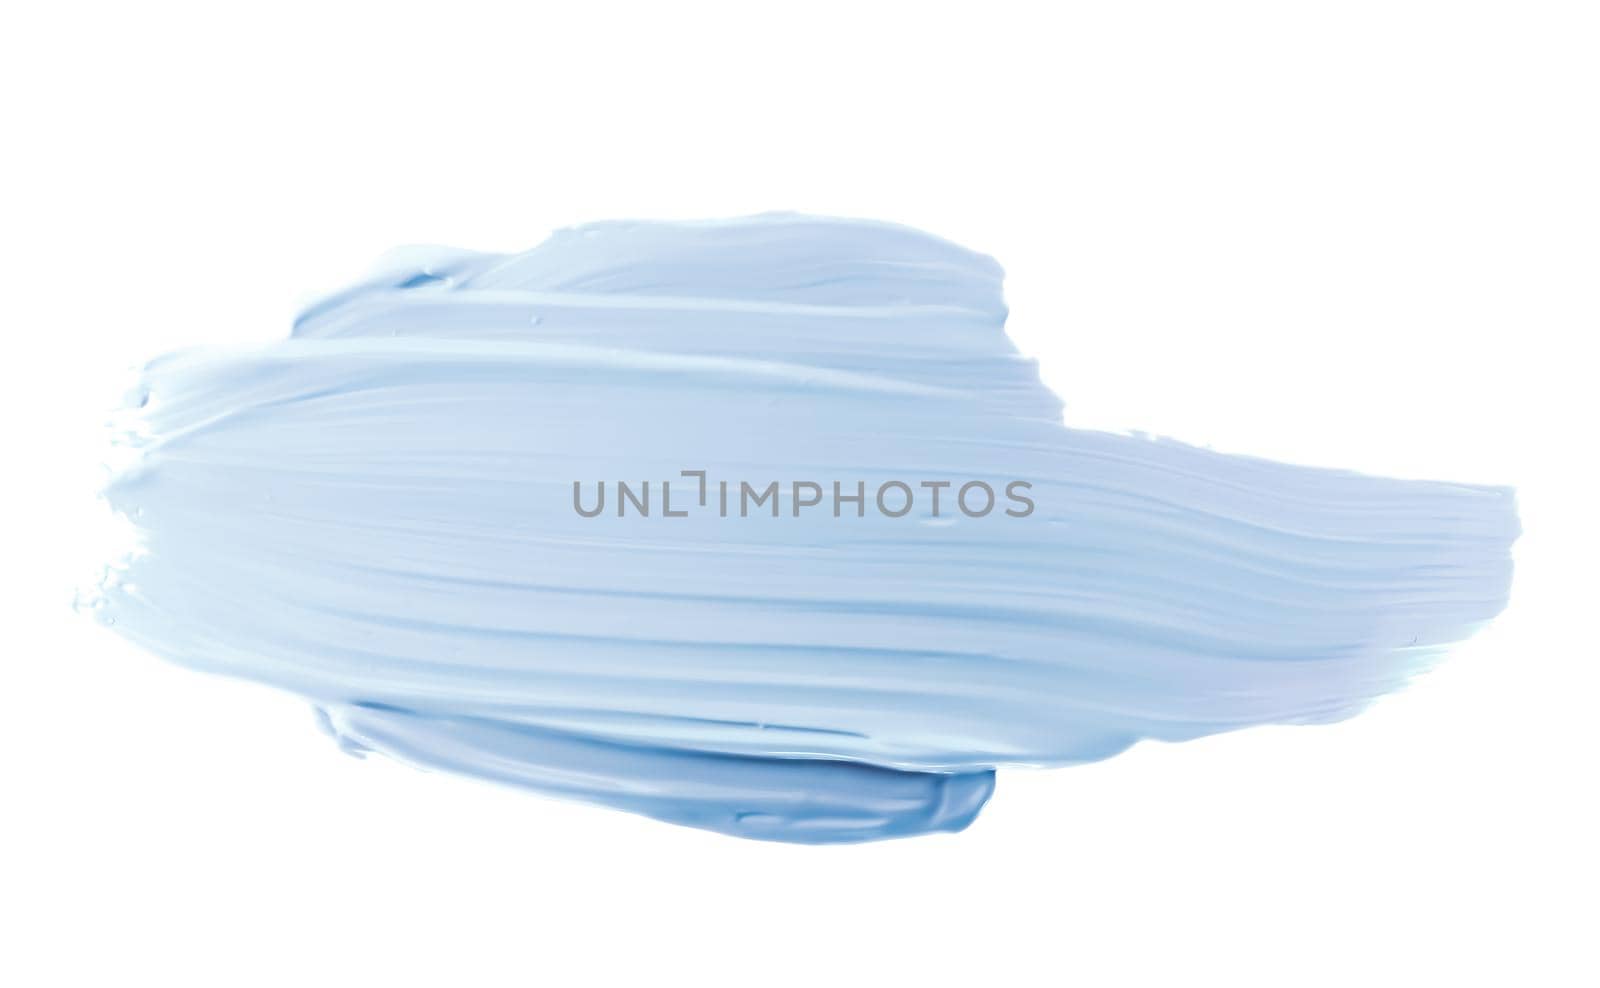 Pastel blue beauty swatch, skincare and makeup cosmetic product sample texture isolated on white background, make-up smudge, cream cosmetics smear or paint brush stroke closeup